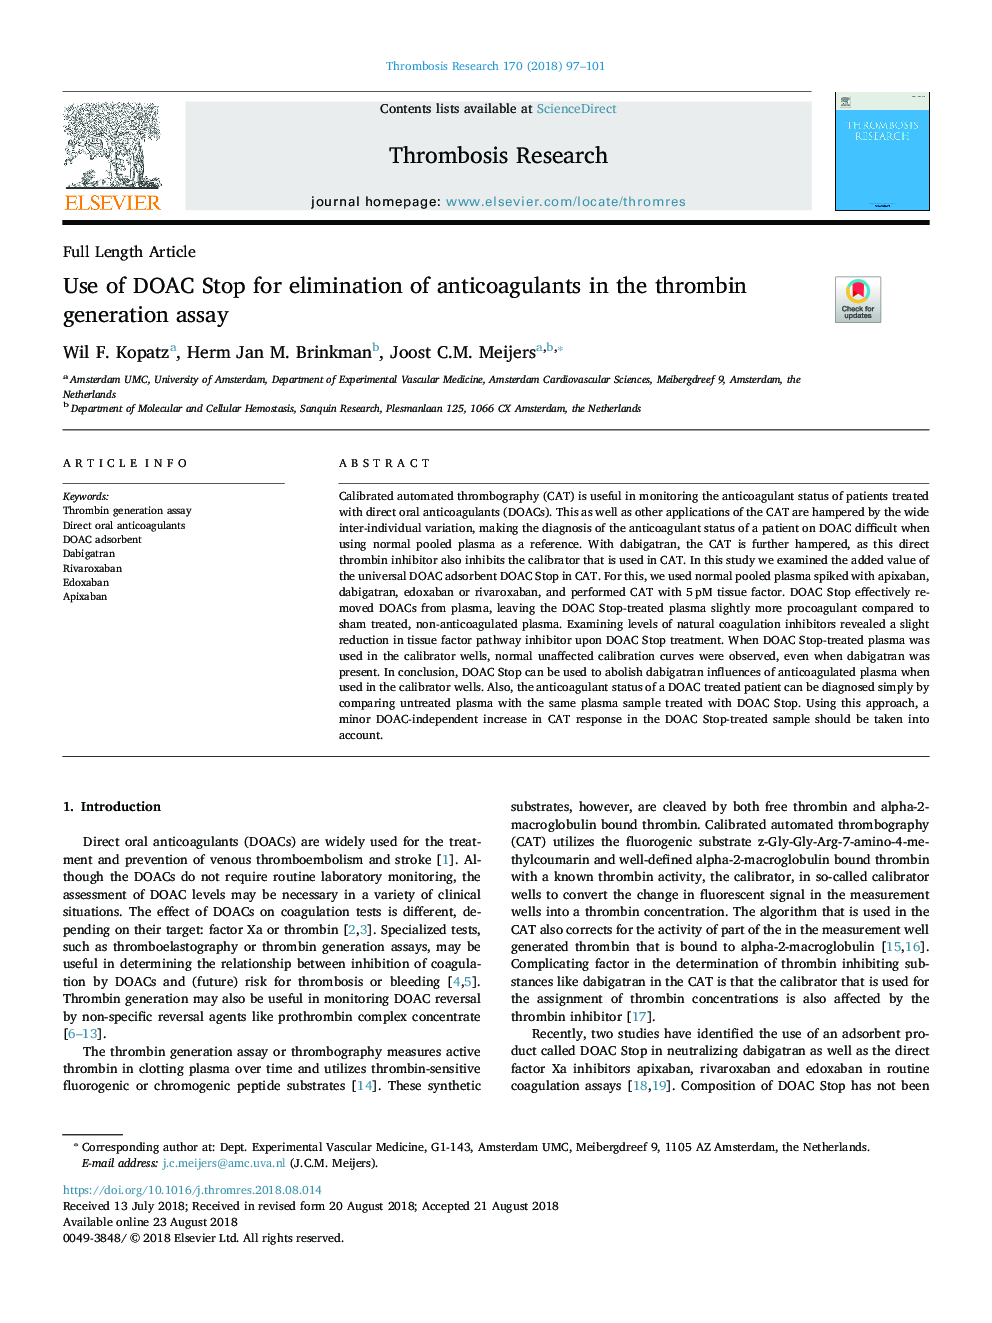 Use of DOAC Stop for elimination of anticoagulants in the thrombin generation assay